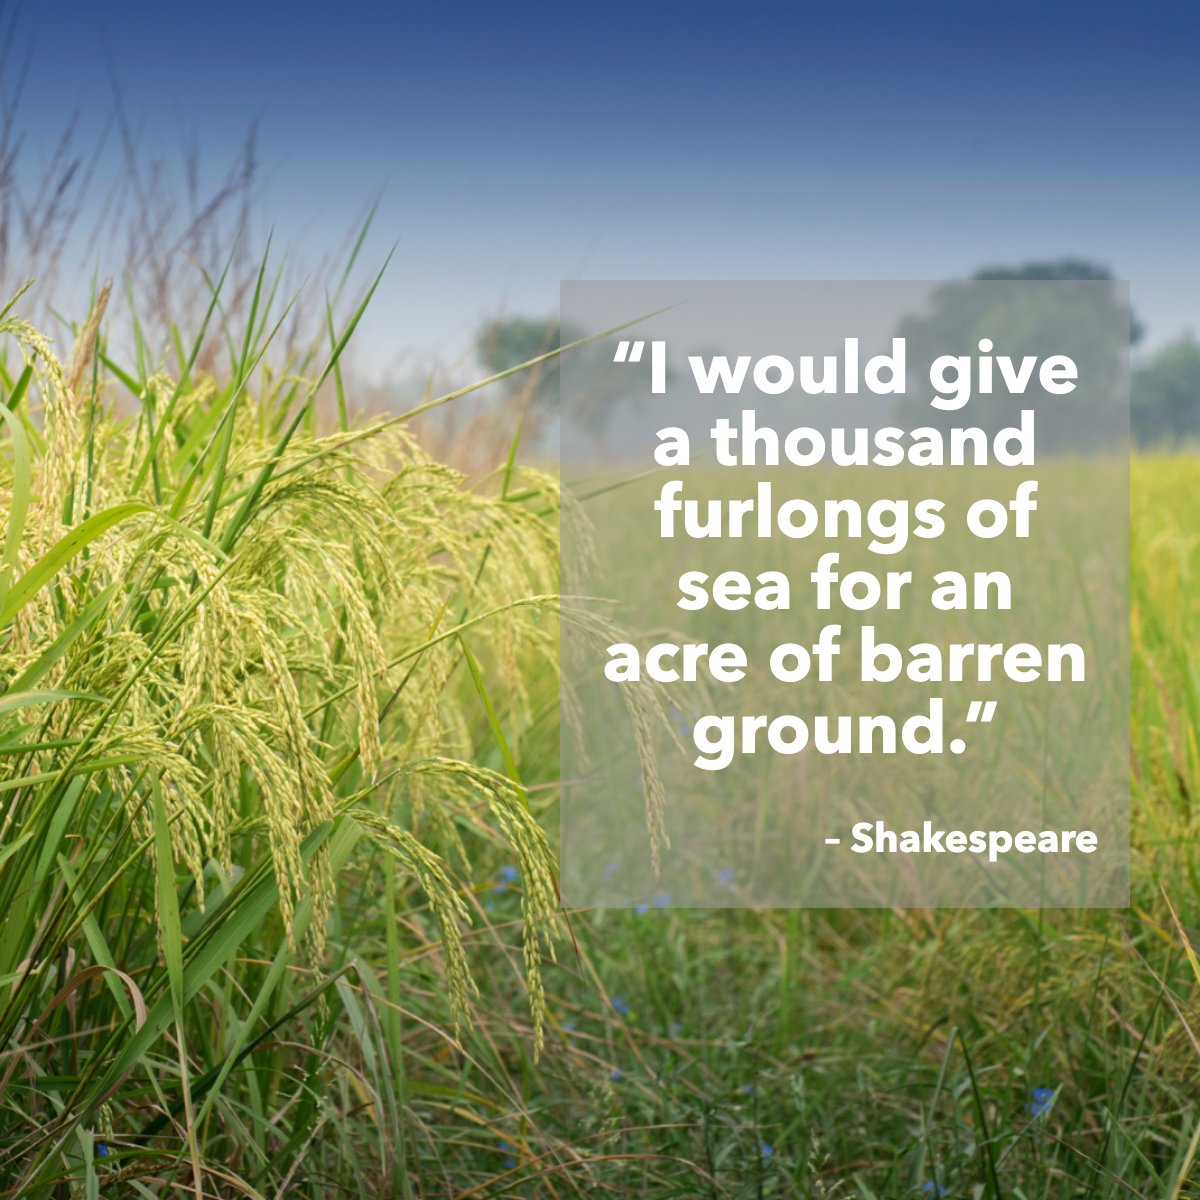 'I would give a thousand furlongs of sea for an acre of barren ground.' 
― William Shakespeare 📖

 #quote #quoteoftheday #land #realestate #property #propertyinvestment #invest
 #boyntonbeachrealestate #southfloridarealtor #palmbeachrealtor #marketreport